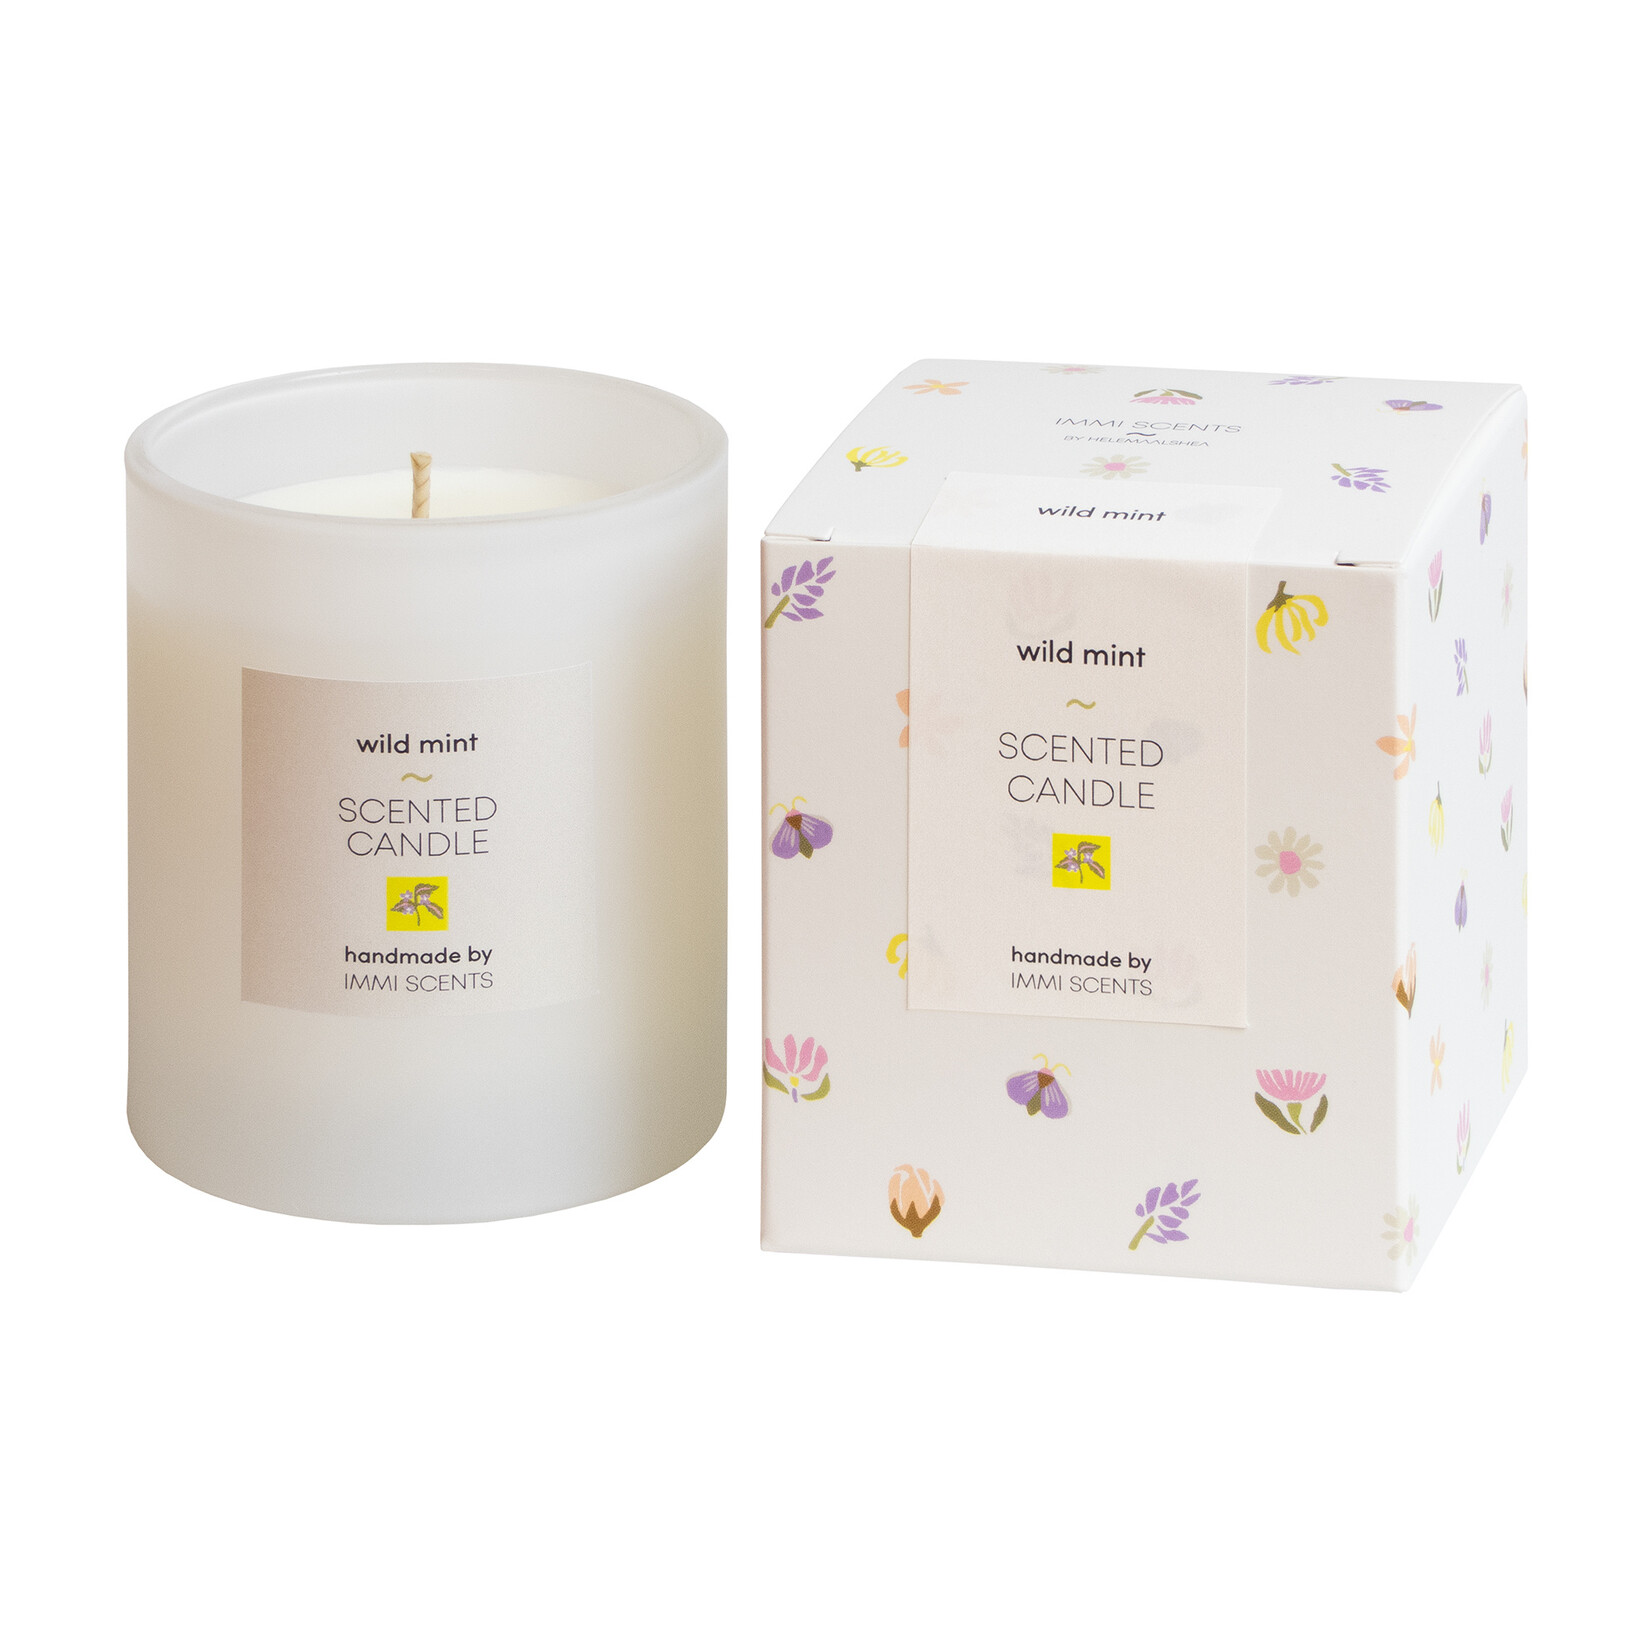 Scented candle - Wild Mint - white